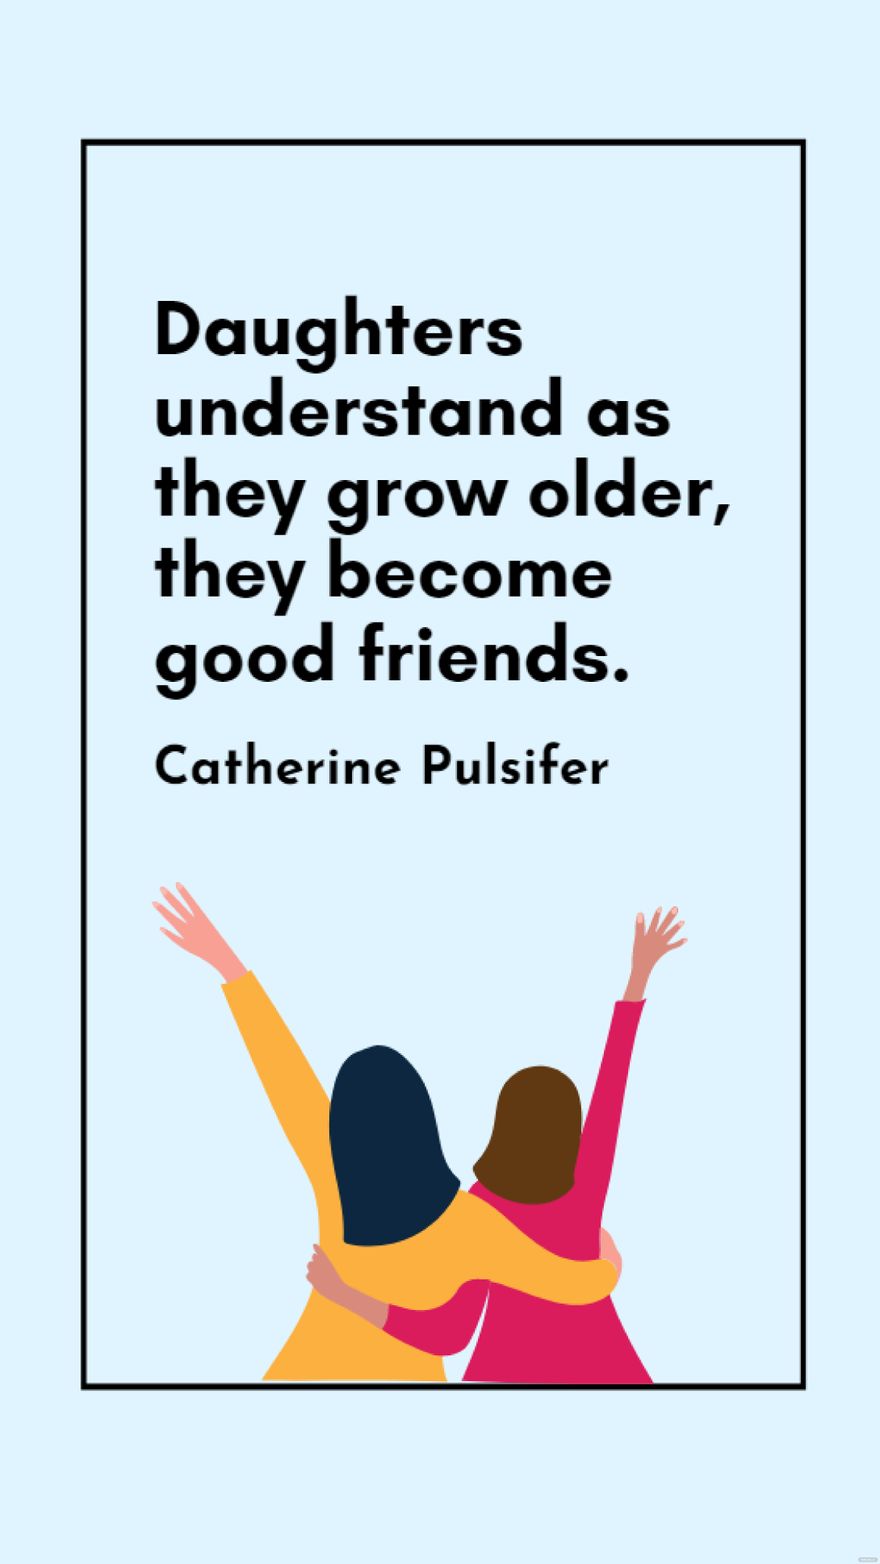 Catherine Pulsifer - Daughters understand as they grow older, they become good friends.